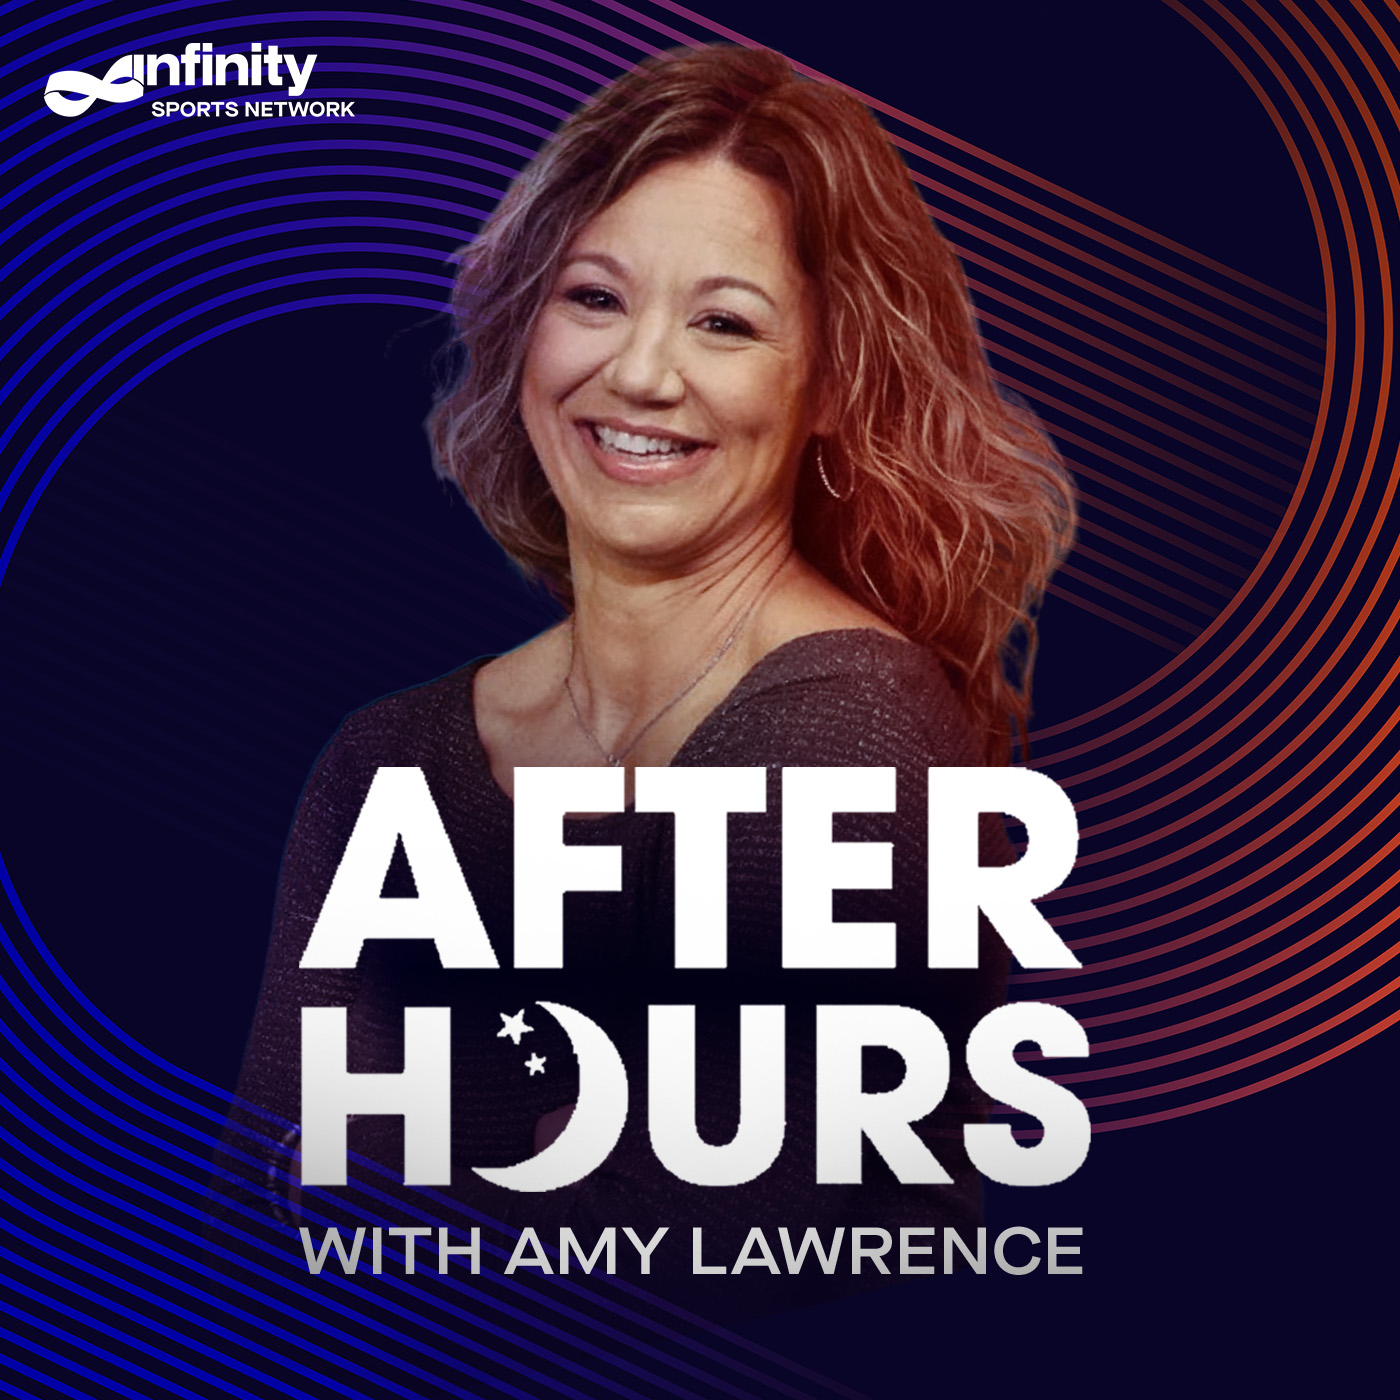 2-17-22 After Hours with Amy Lawrence PODCAST: Hour 2